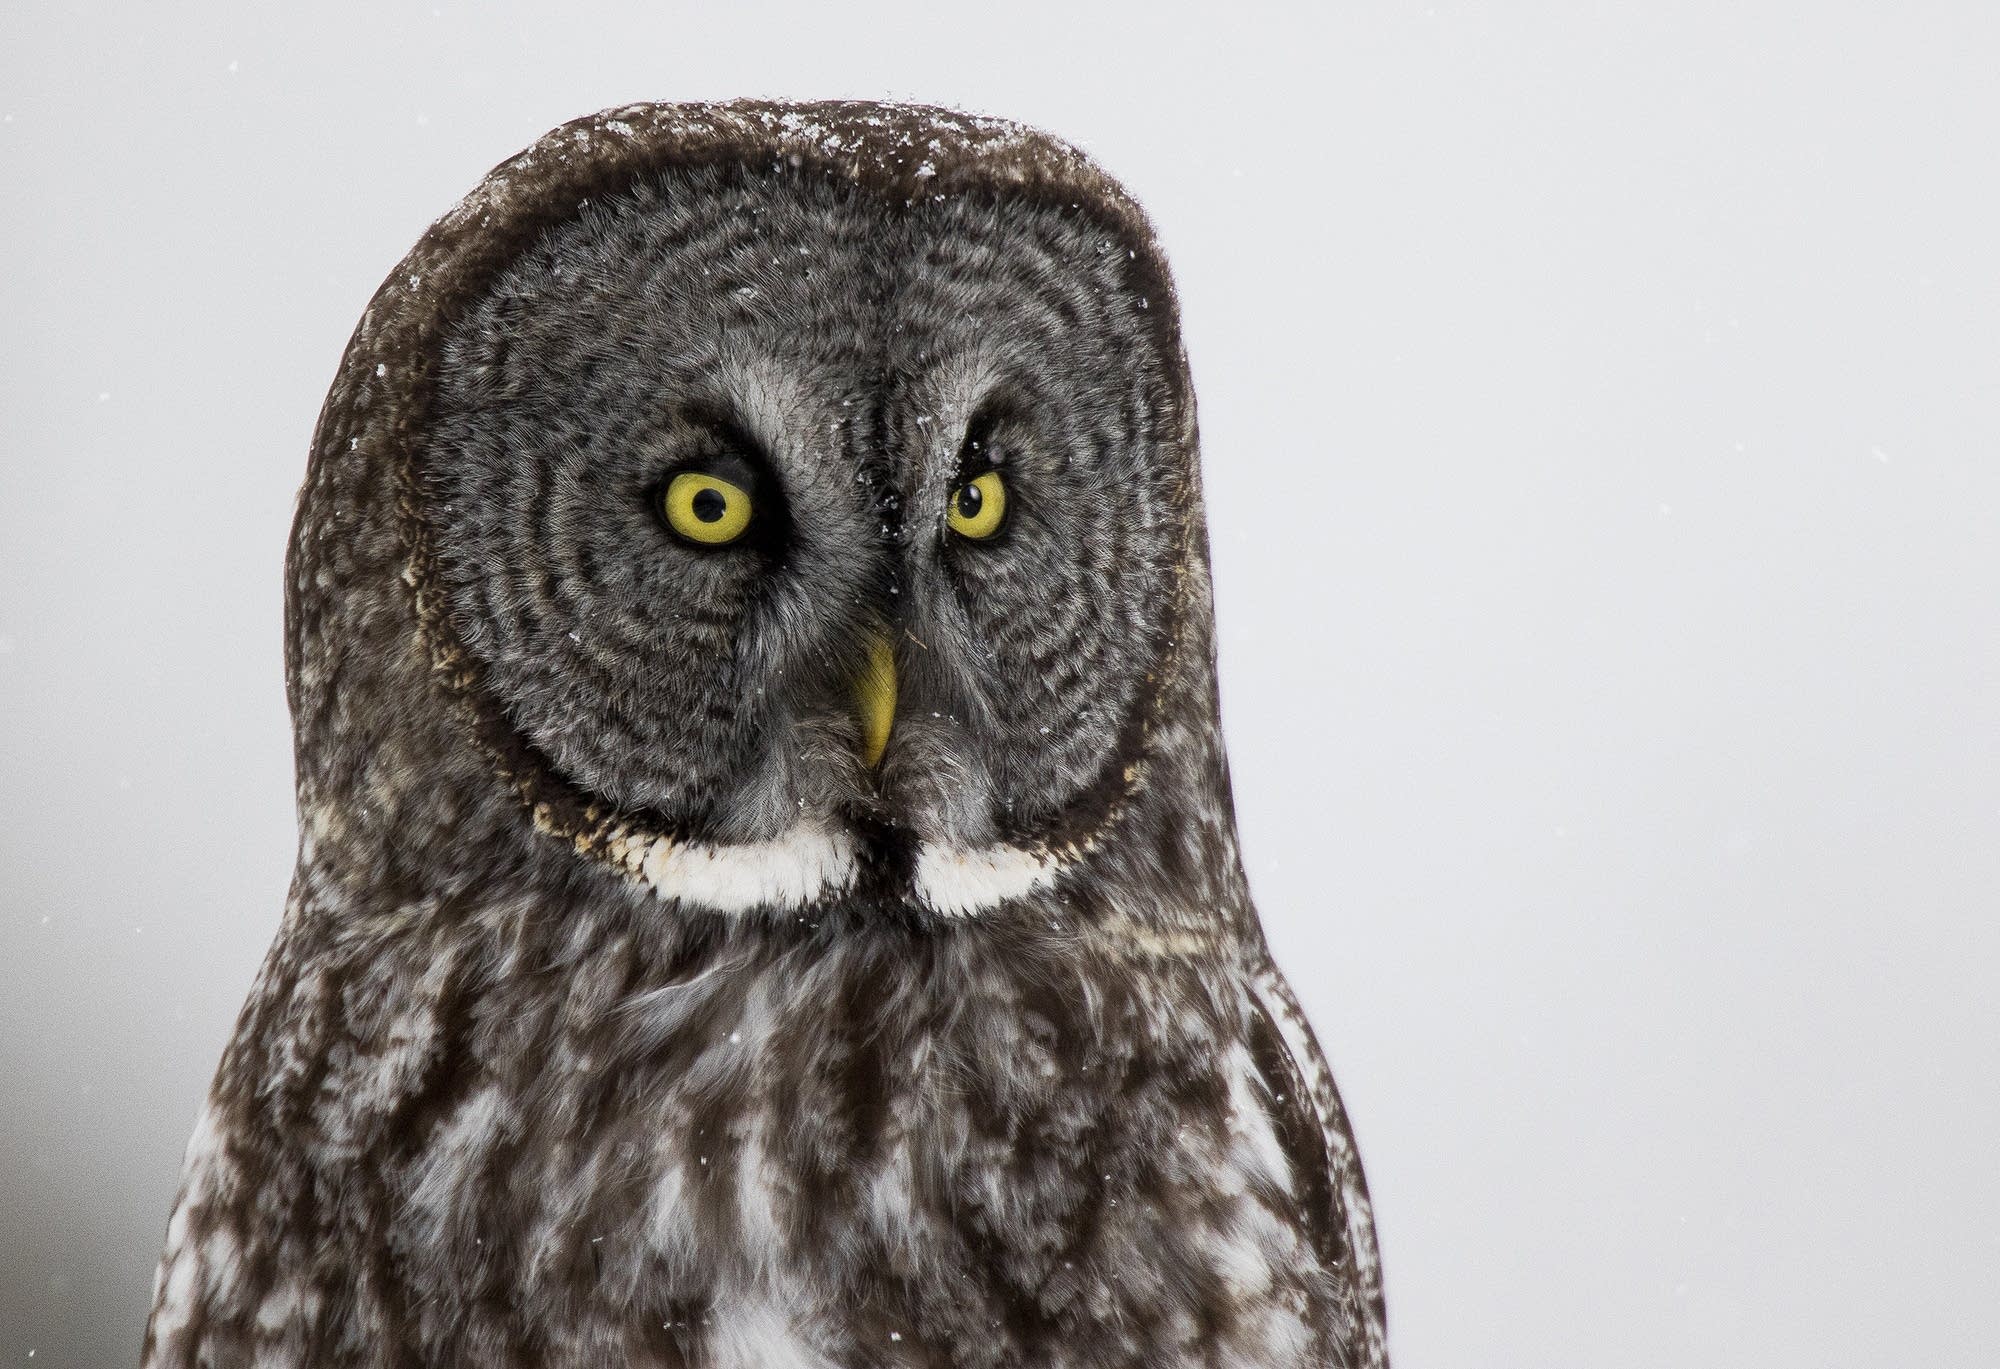 Angry bird: Signs an owl is about to attack you | Minnesota Public ...